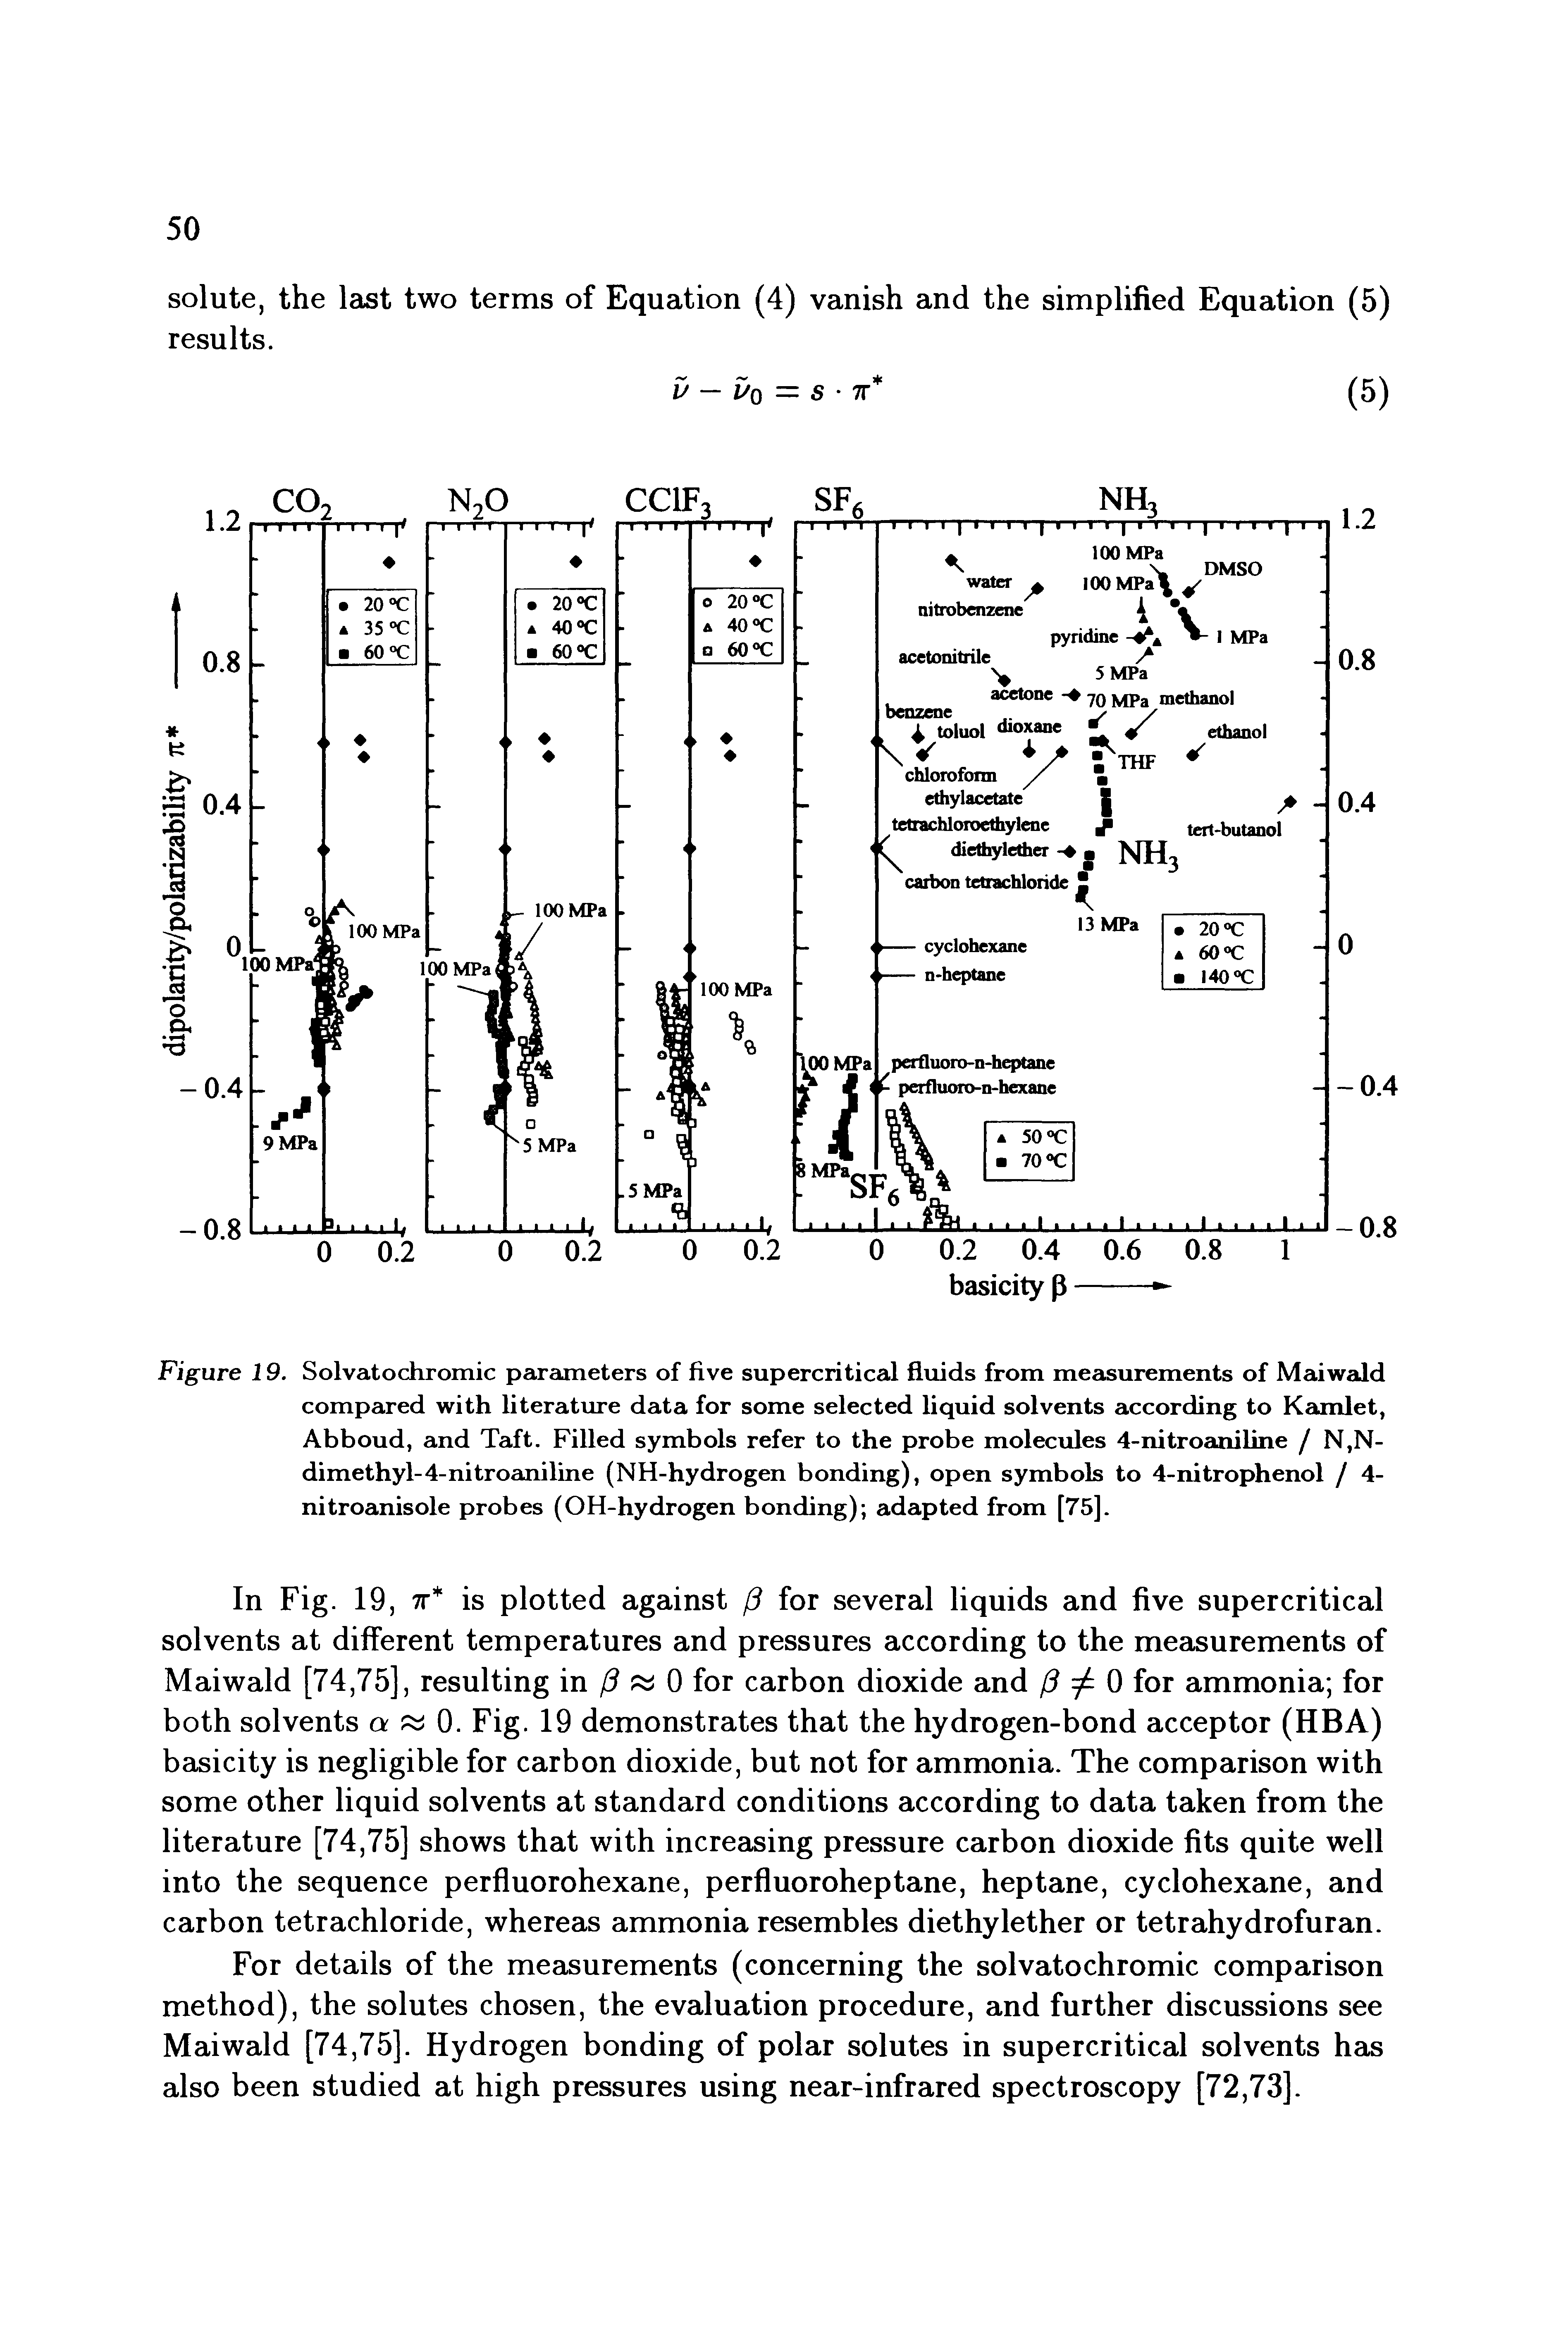 Figure 19. Solvatochromic parameters of five supercritical fluids from measurements of Maiwald compared with literature data for some selected liquid solvents according to Kamlet, Abboud, and Taft. Filled symbols refer to the probe molecules 4-nitroaniline / N,N-dimethyl-4-nitroaniline (NH-hydrogen bonding), open symbols to 4-nitrophenol / 4-nitroanisole probes (OH-hydrogen bonding) adapted from [75].